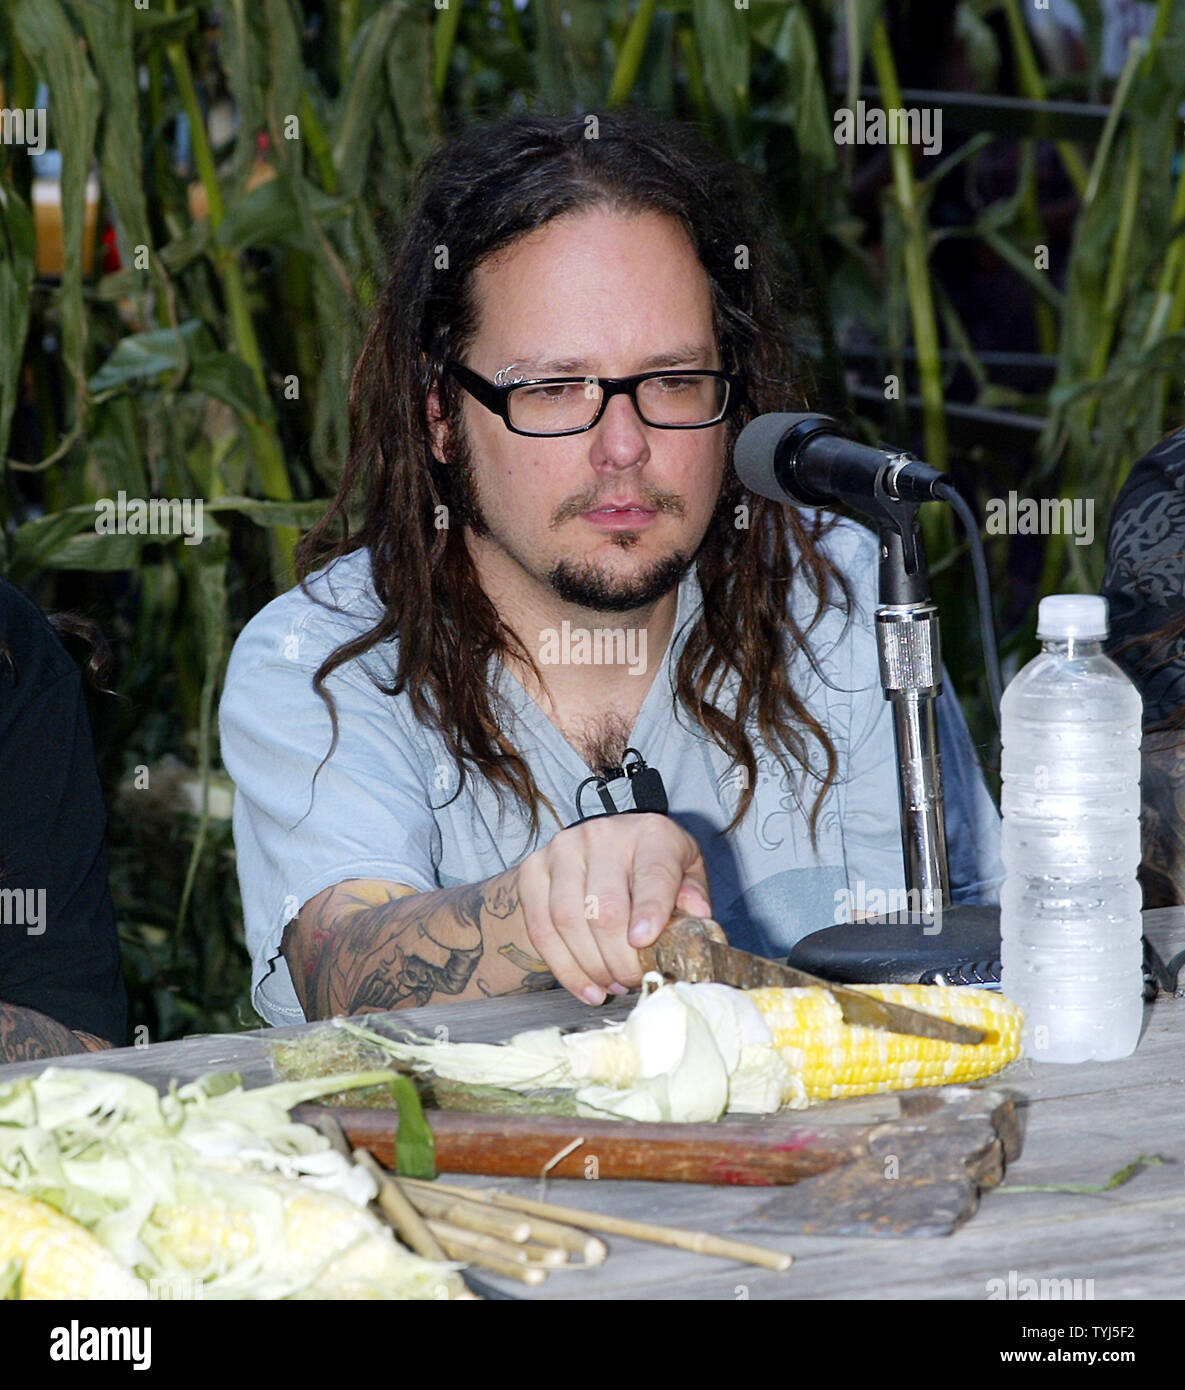 Frontman Of The Music Group Korn Jonathan Davis Attends A Press Conference To Discuss The Band S New Cd Their Environmental Efforts And Their Partnership With The Uso At The Times Square Recruiting